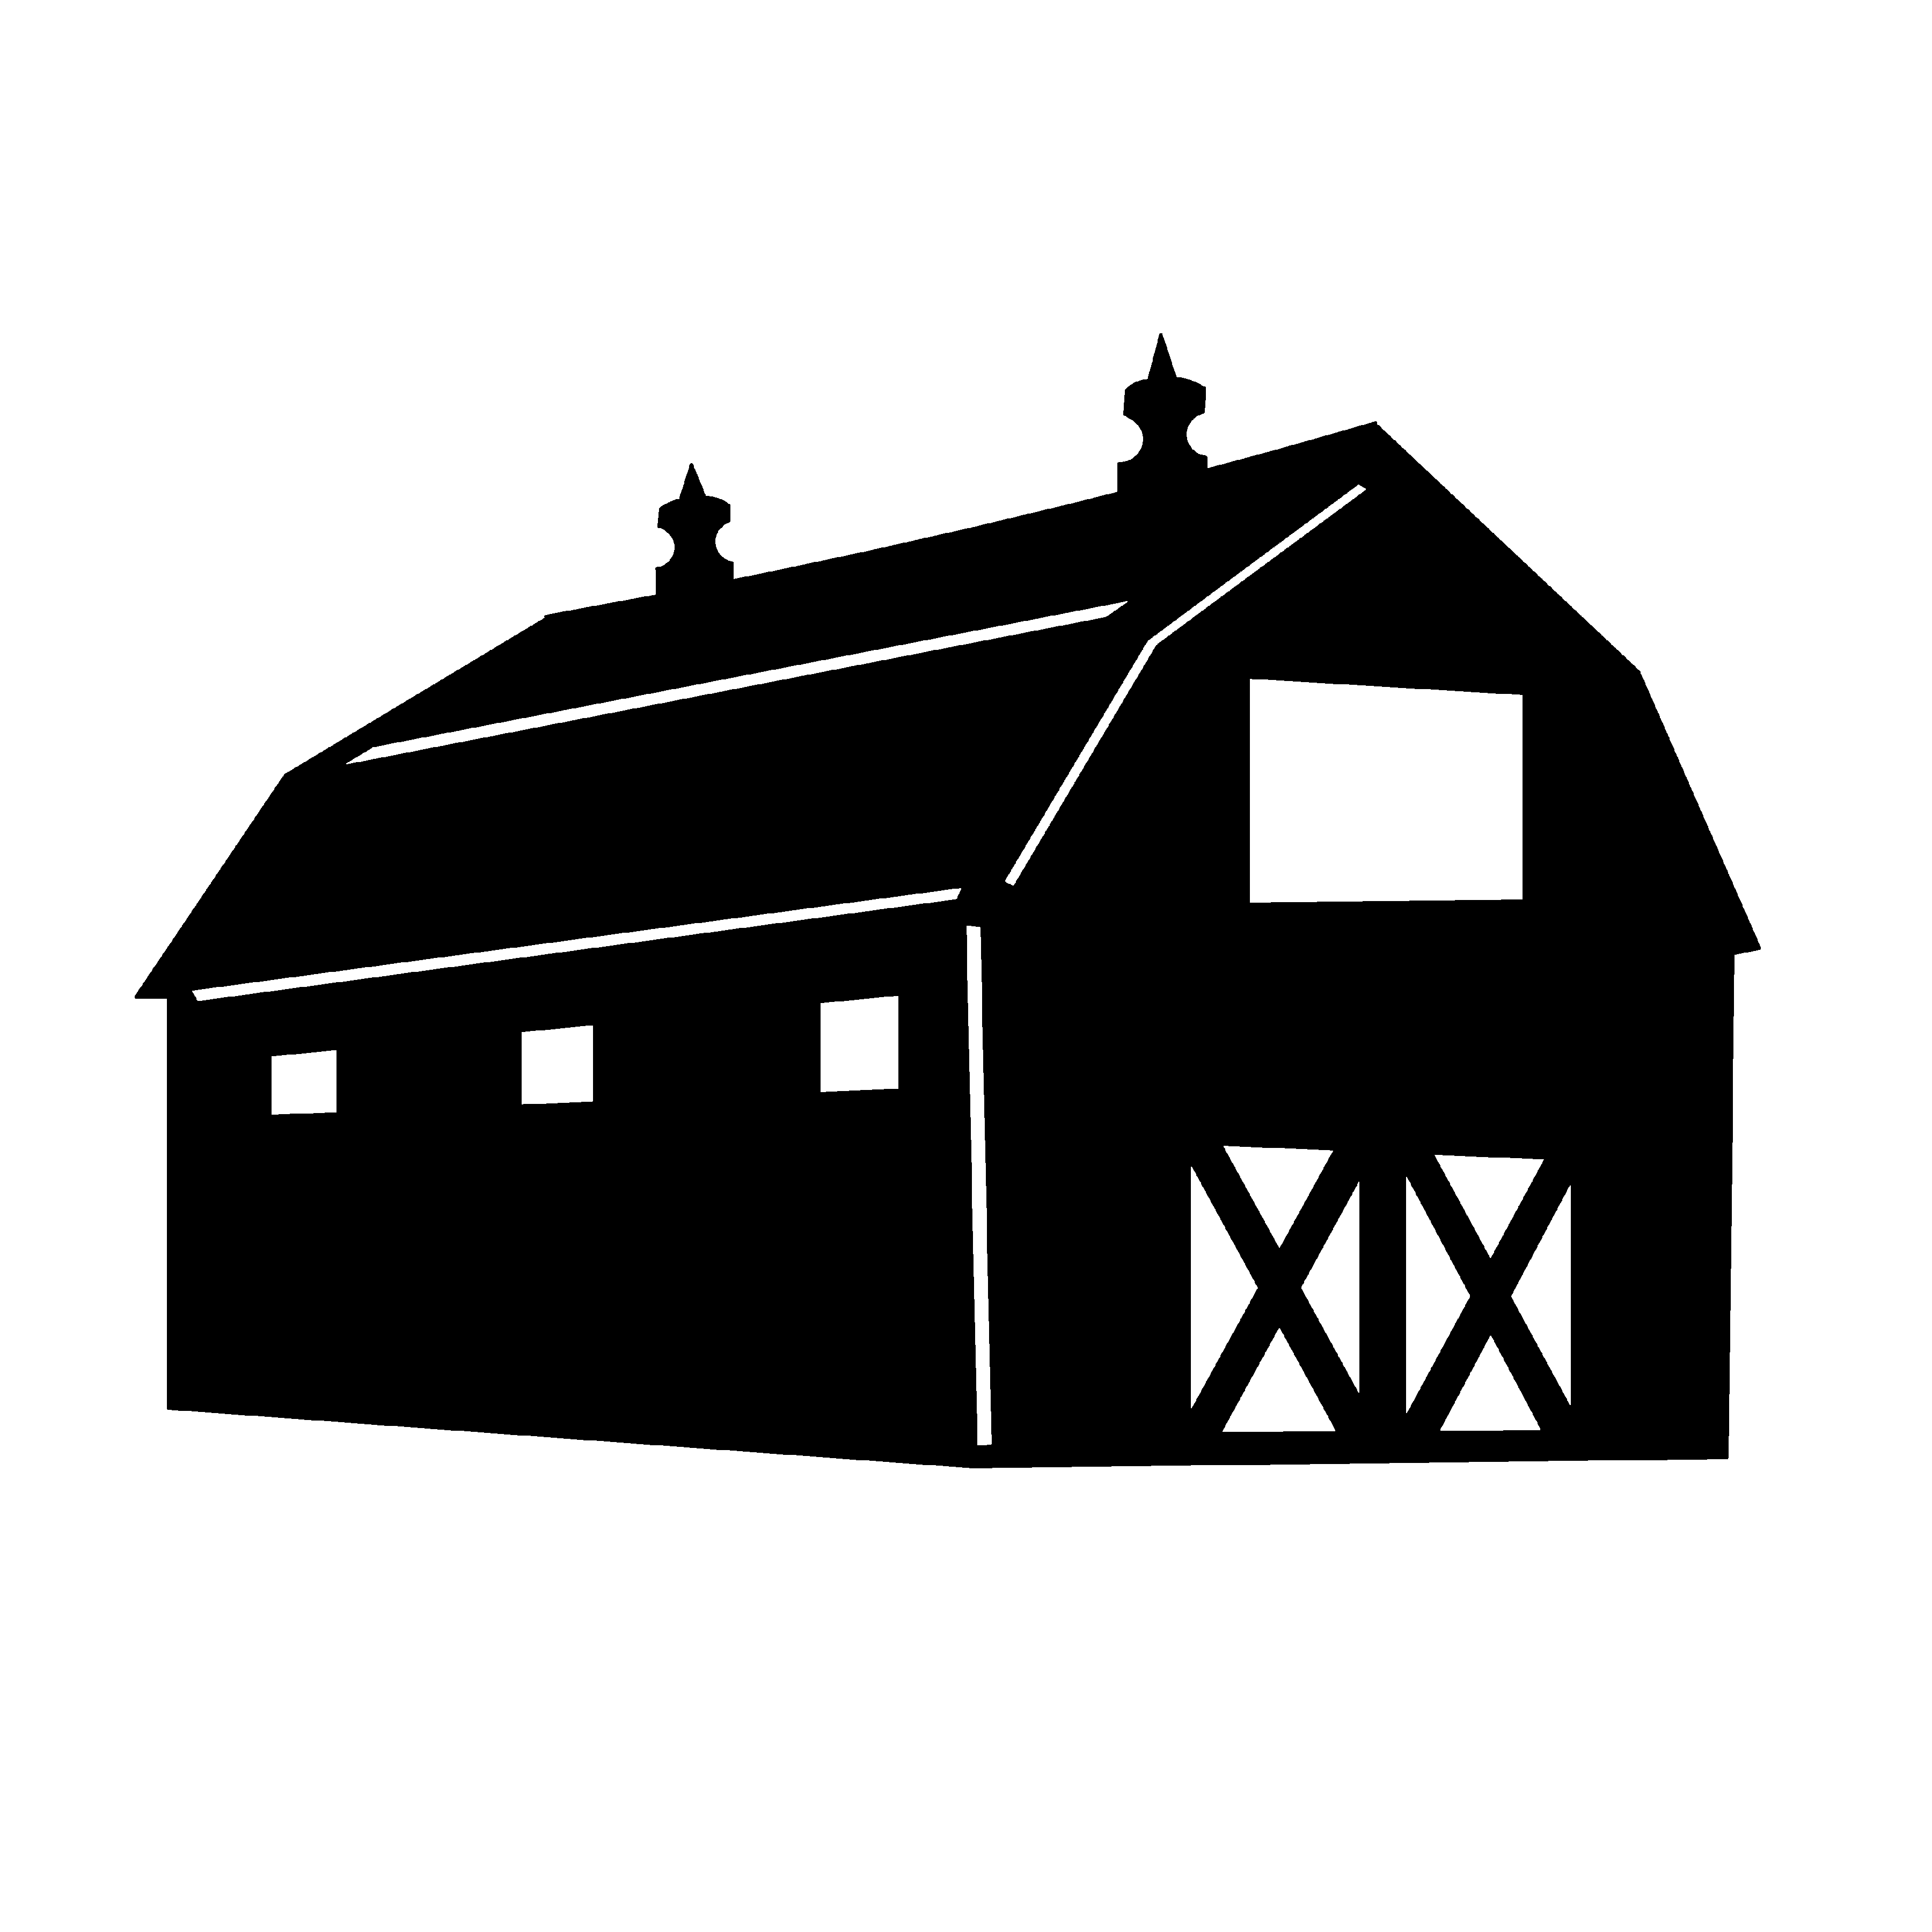 Nice shed clipart red barn clip art furniture decorating ideas